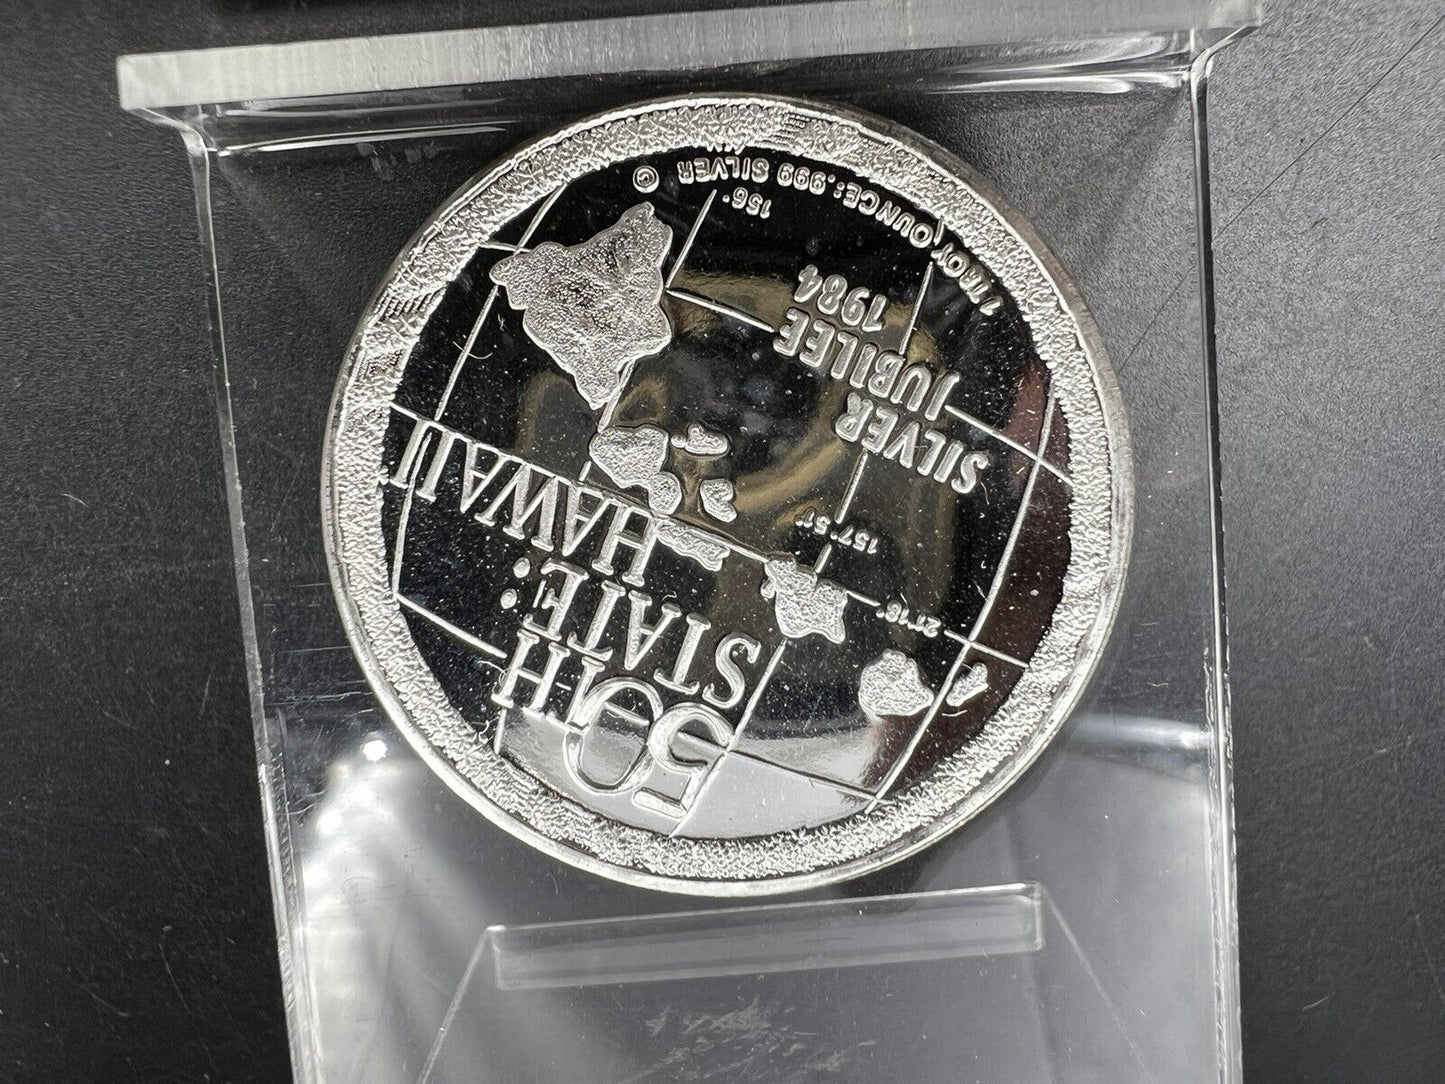 1984 Hawaii 50th State Silver Jubilee 1 oz Silver Choice Proof Round Coin